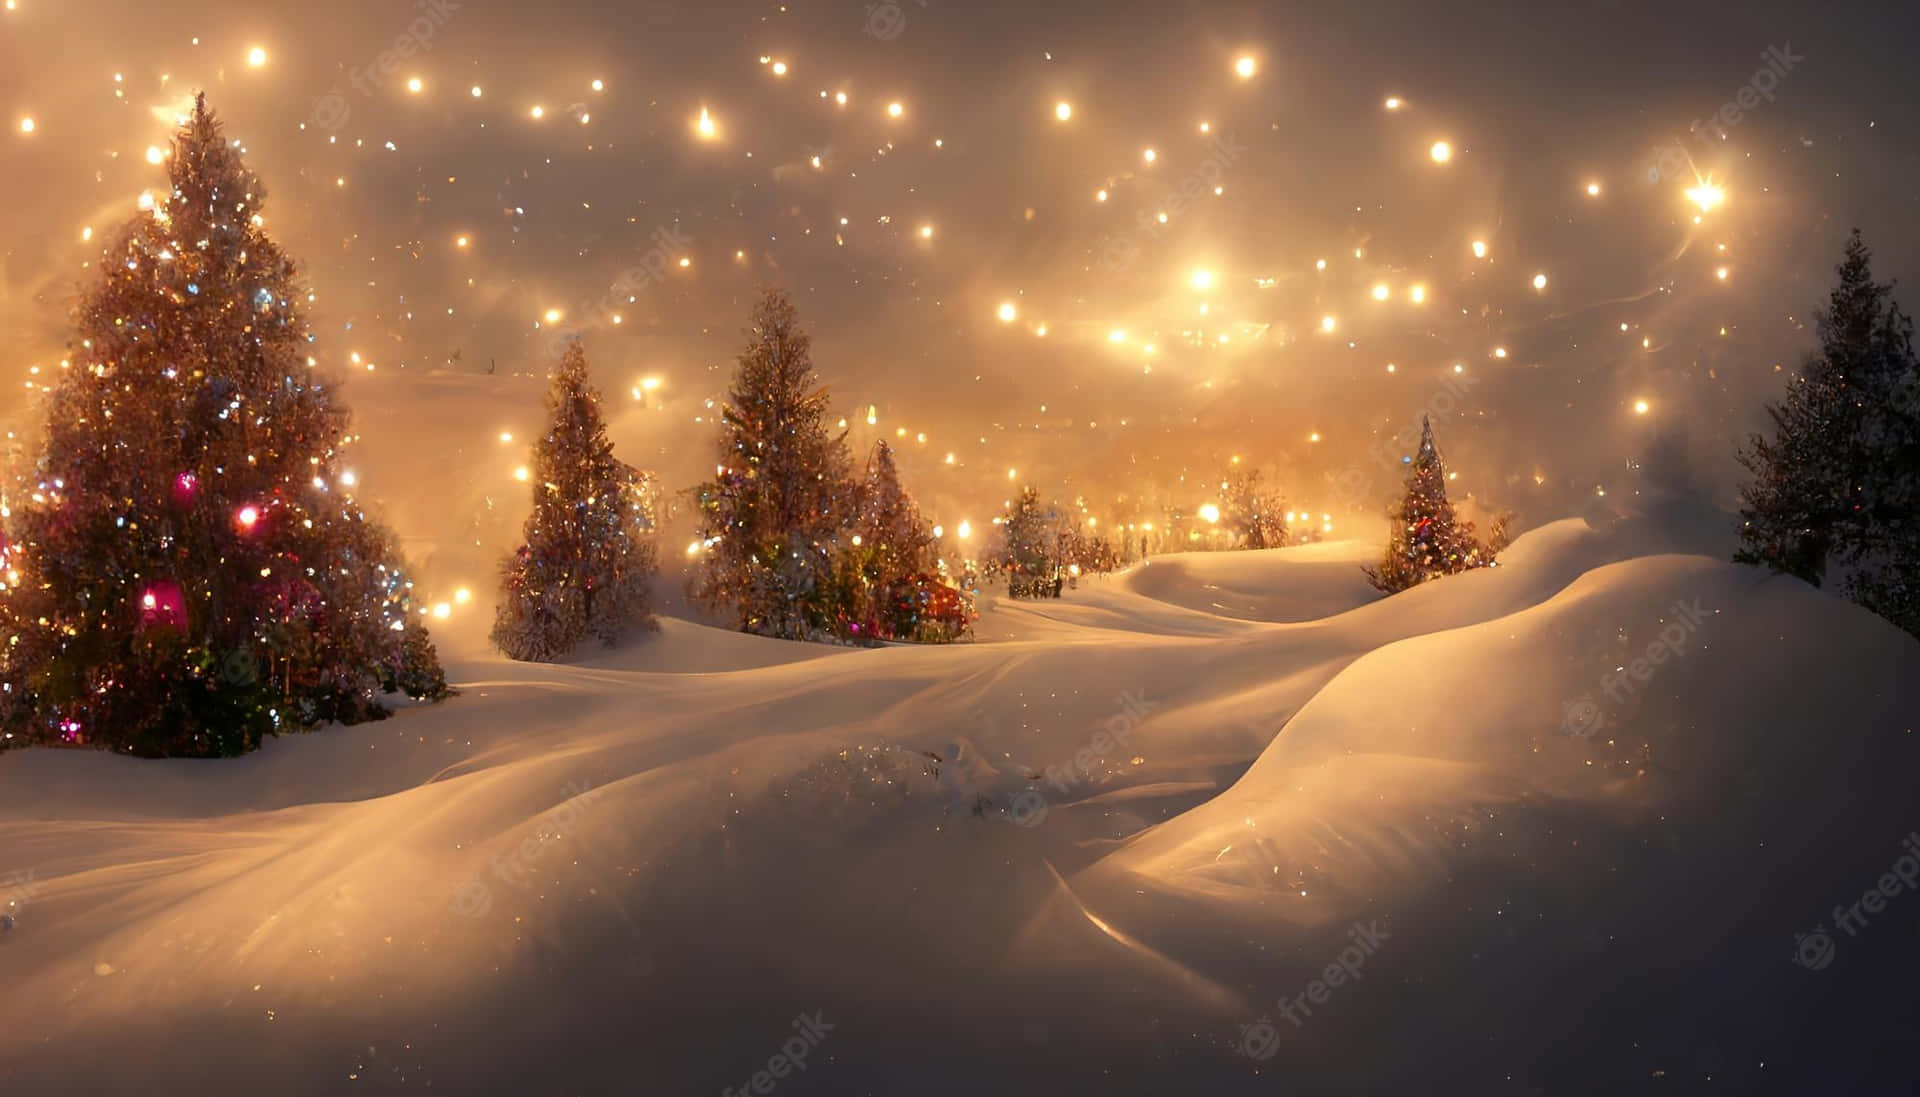 Enjoy the Winter Christmas Ambiance with a Desktop Background Wallpaper